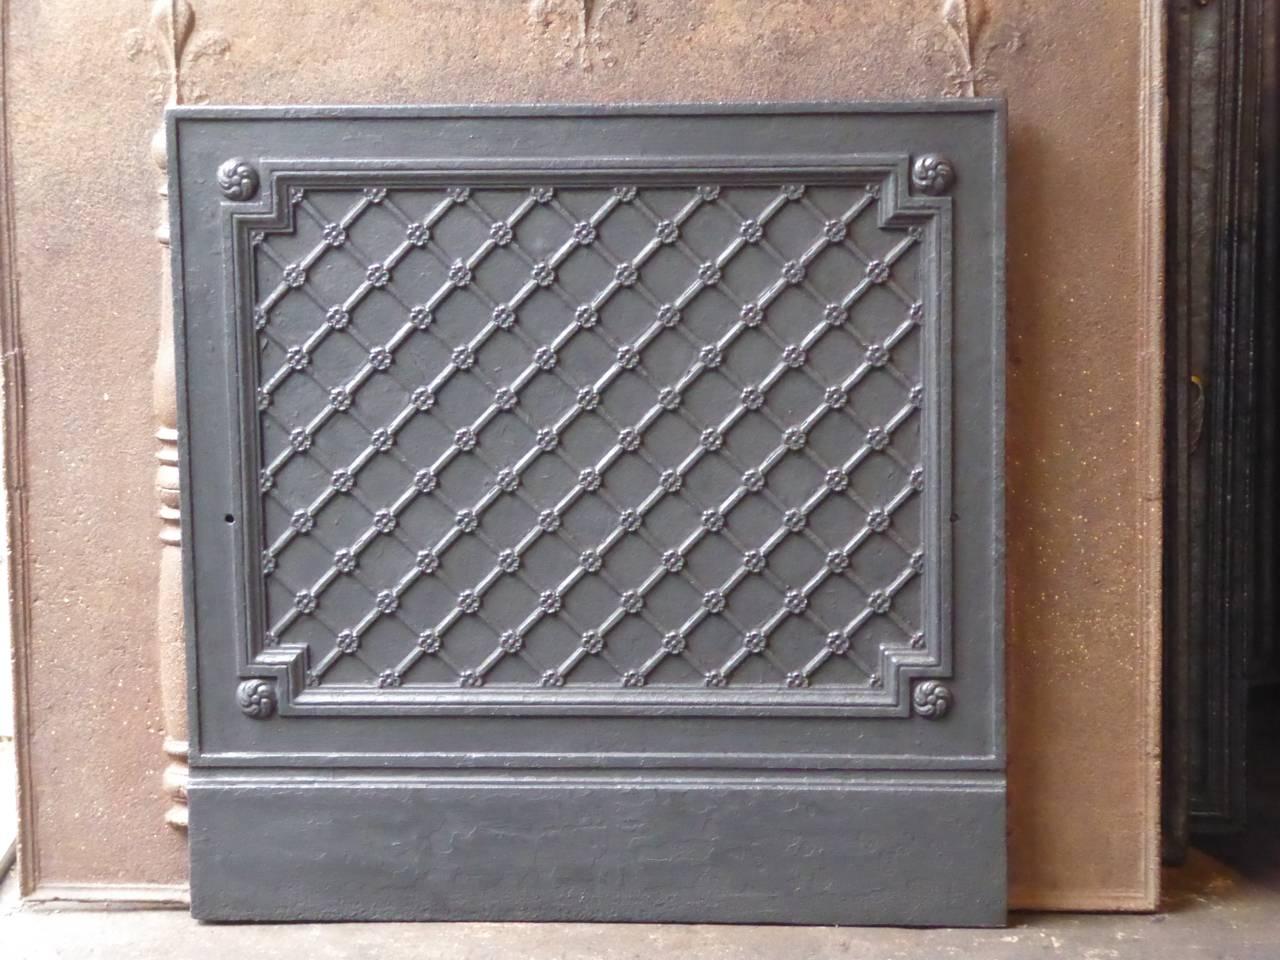 Early 20th century French Art Deco decorated fireback.

We have a unique and specialized collection of antique and used fireplace accessories consisting of more than 1000 listings at 1stdibs. Amongst others, we always have 300+ firebacks, 250+ pairs